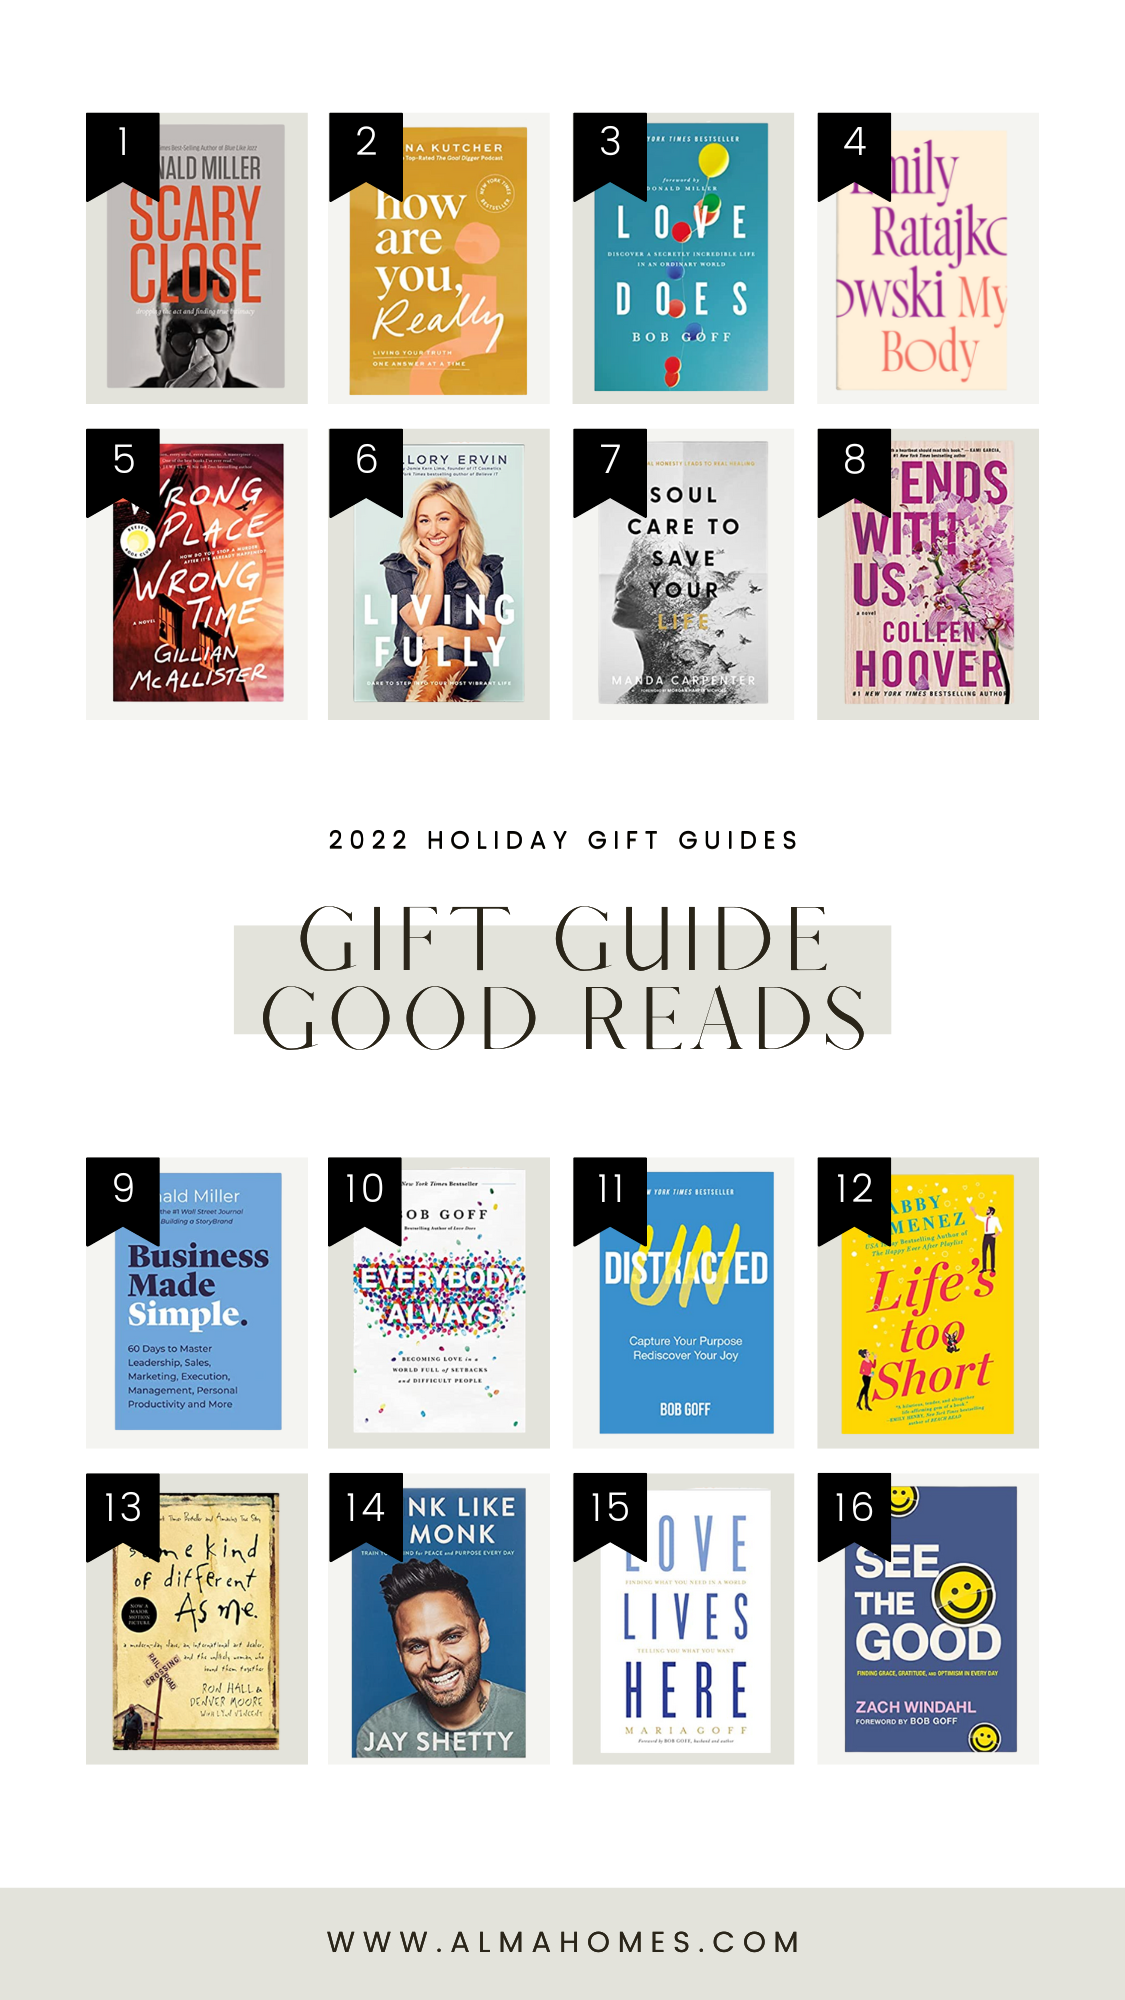 Alma-Homes-2022-Holiday-Gift-Guides-Must-Read-Books